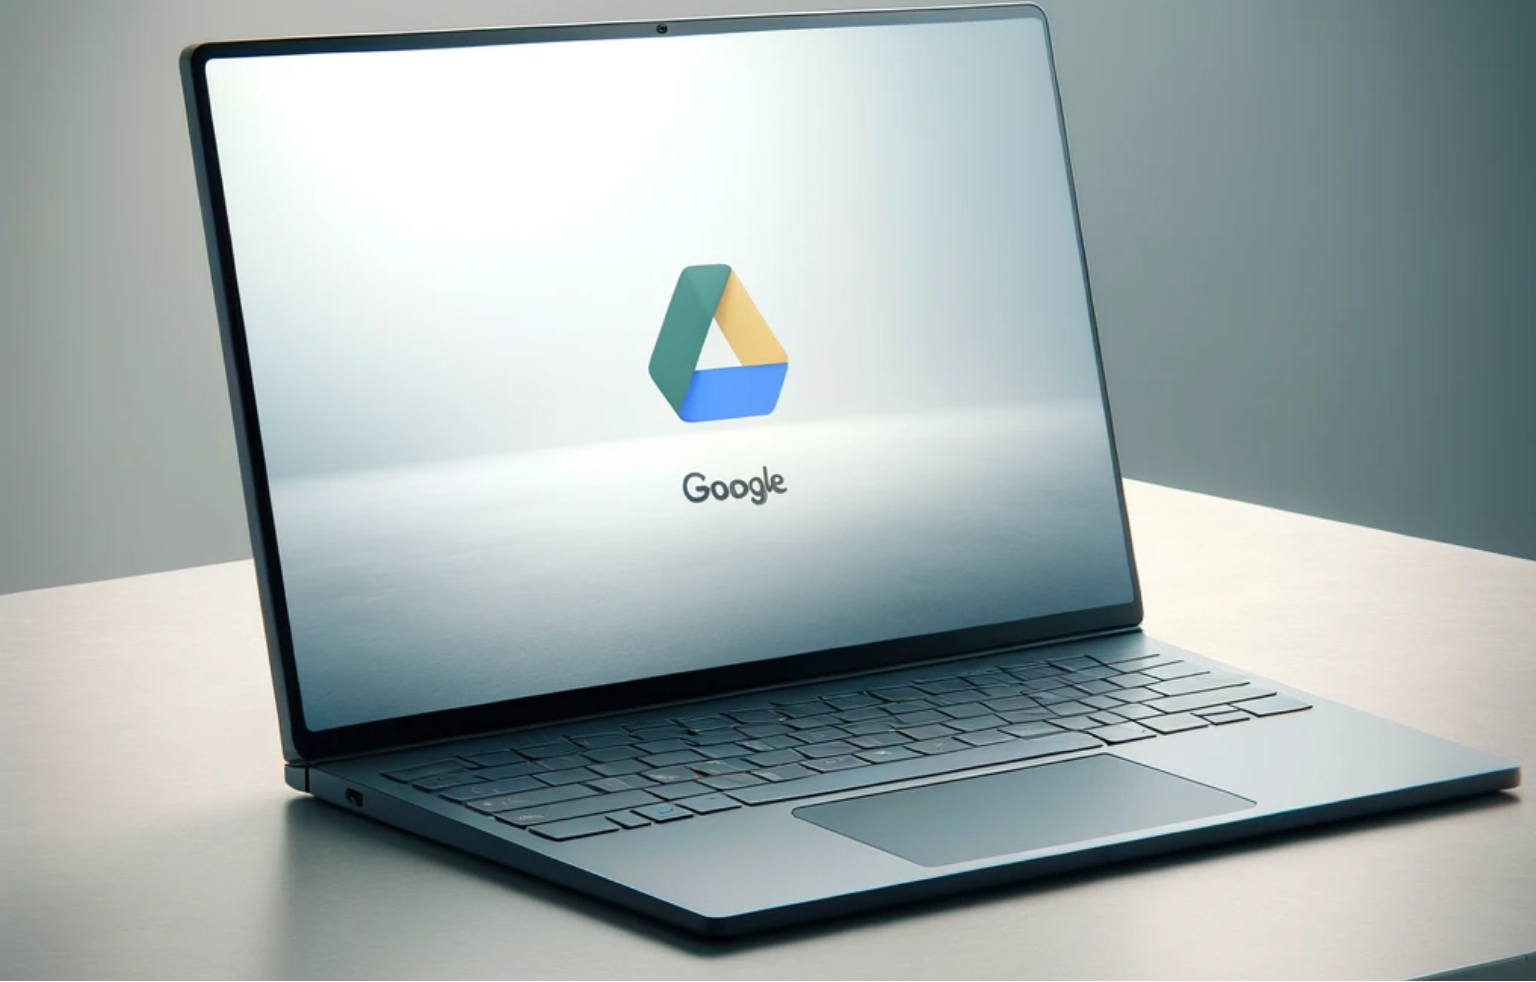 A-modern-sleek-laptop-with-a-high-resolution-screen-displaying-the-Google-Drive-symbol.-The-laptop-is-placed-on-a-minimalist-desk-emphasizing-data back up